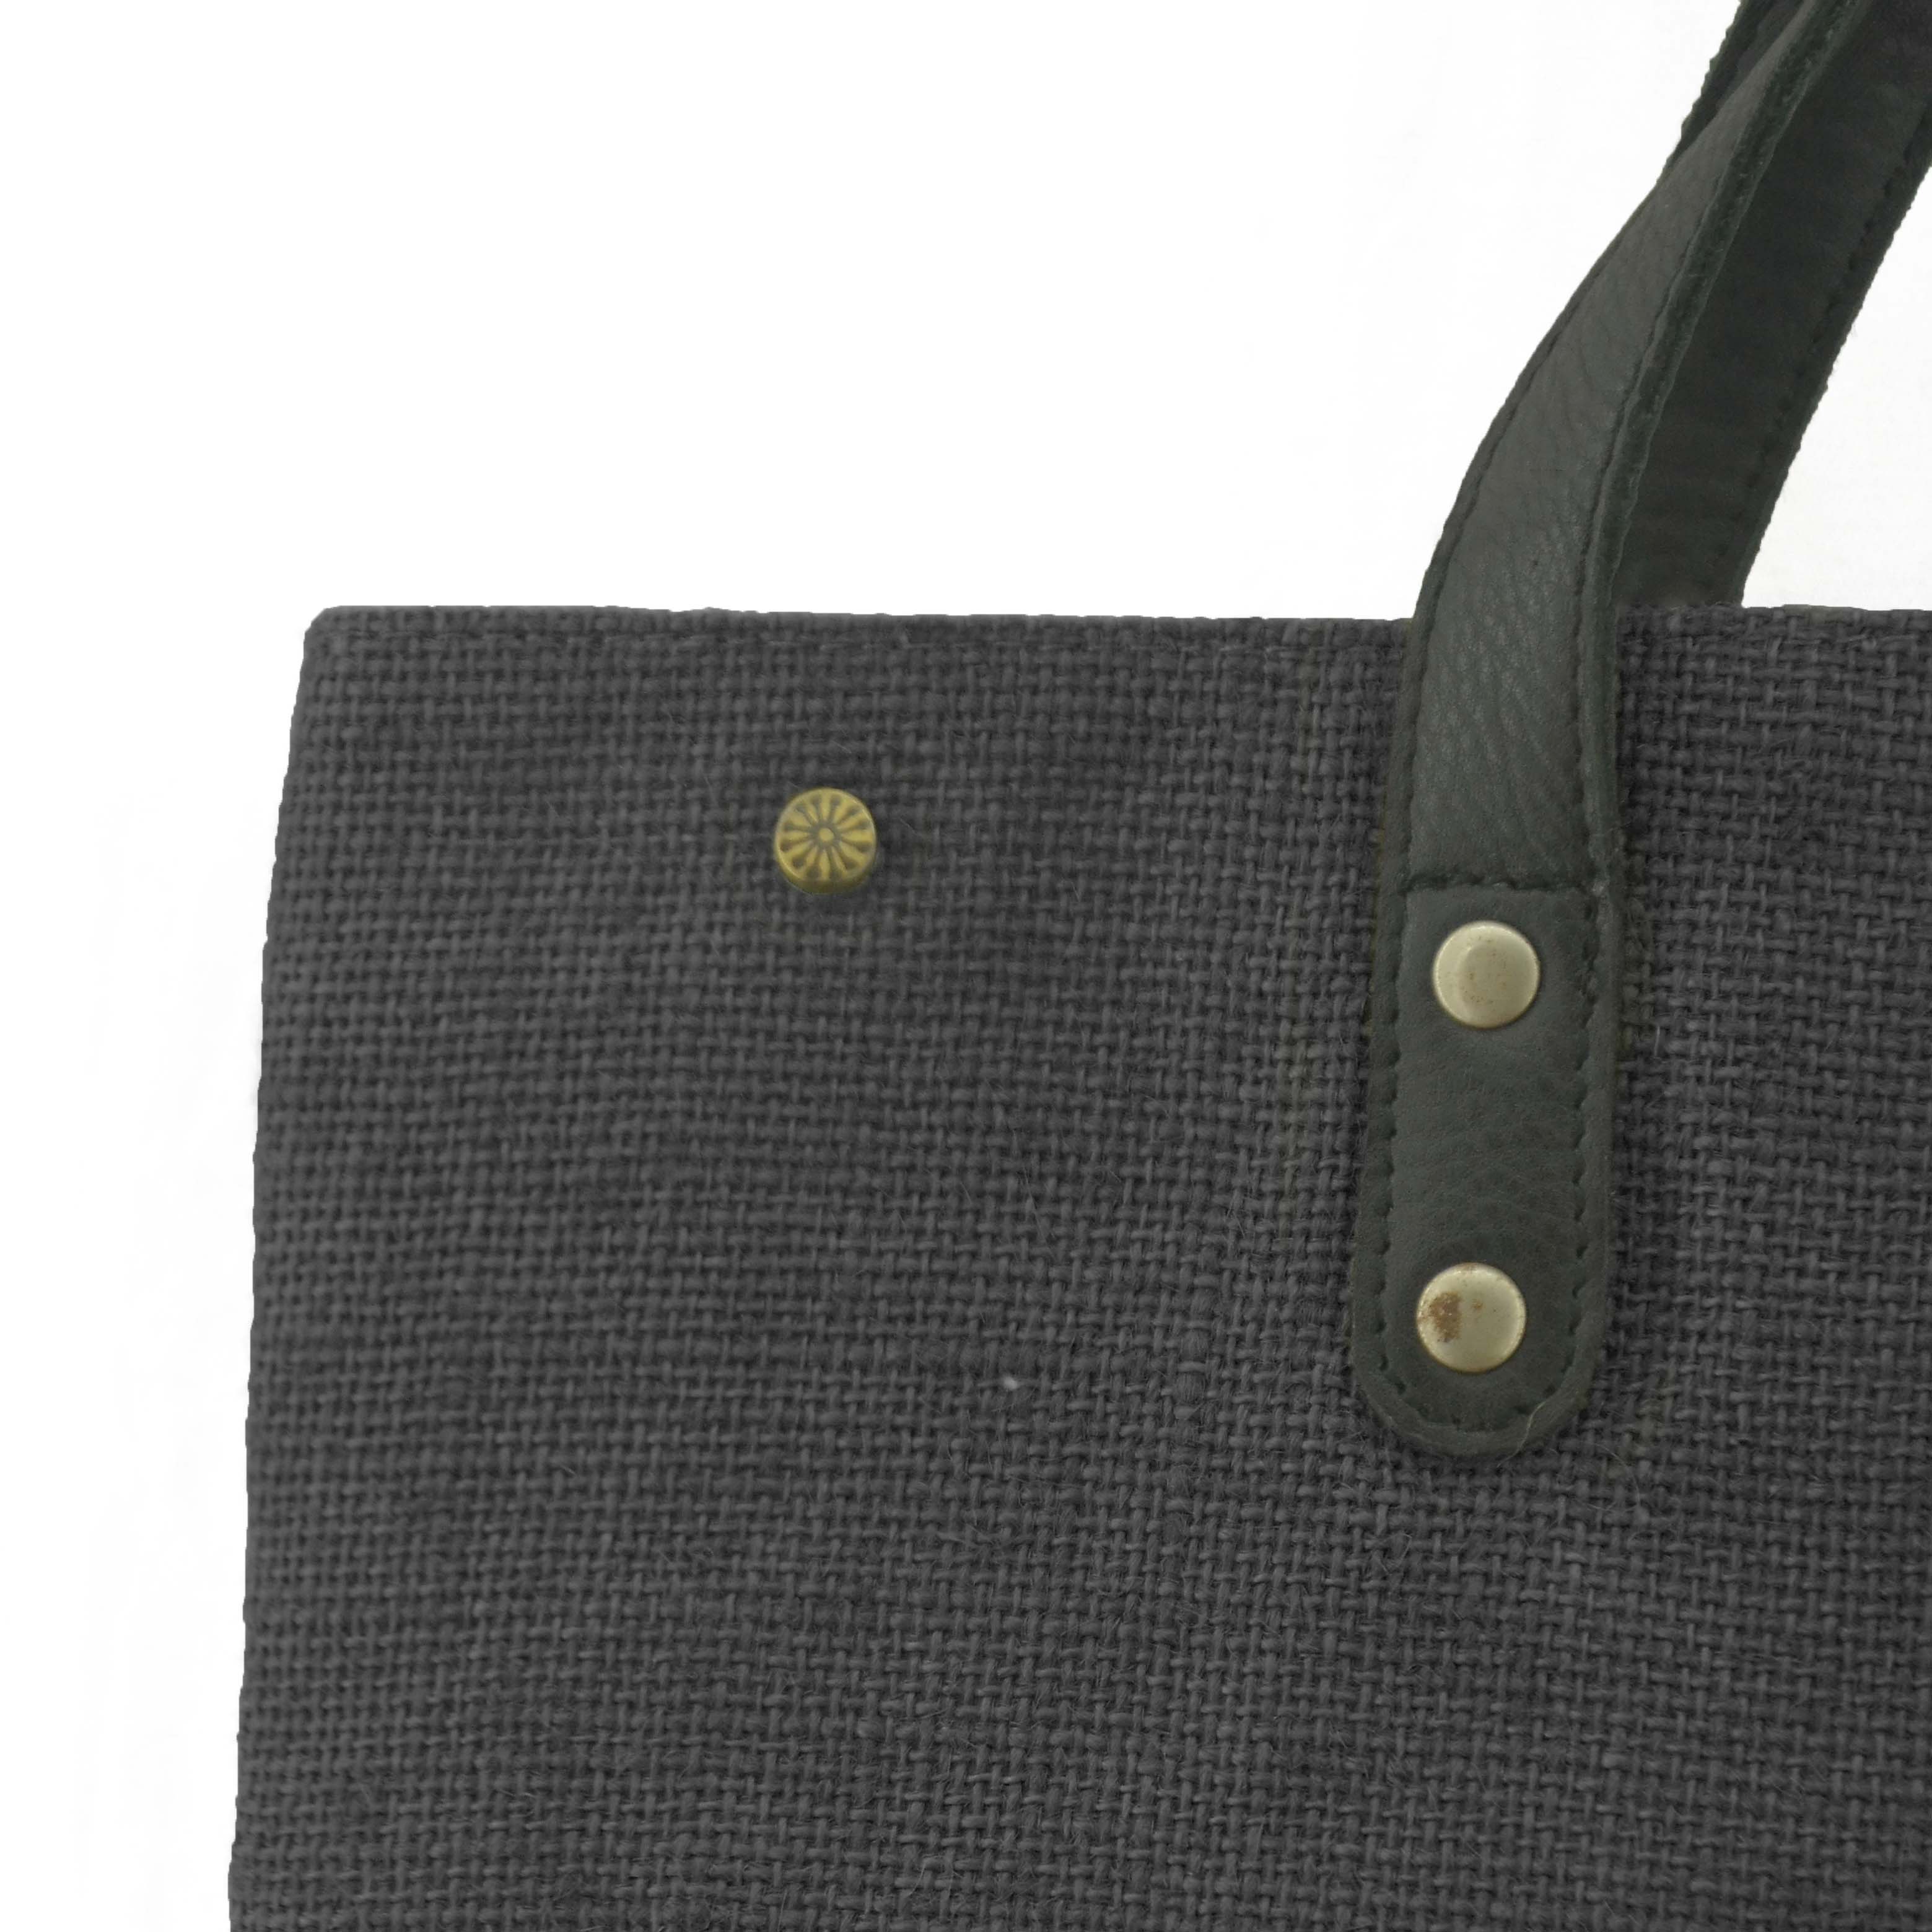 Jute Tote Bag with Leather Handles